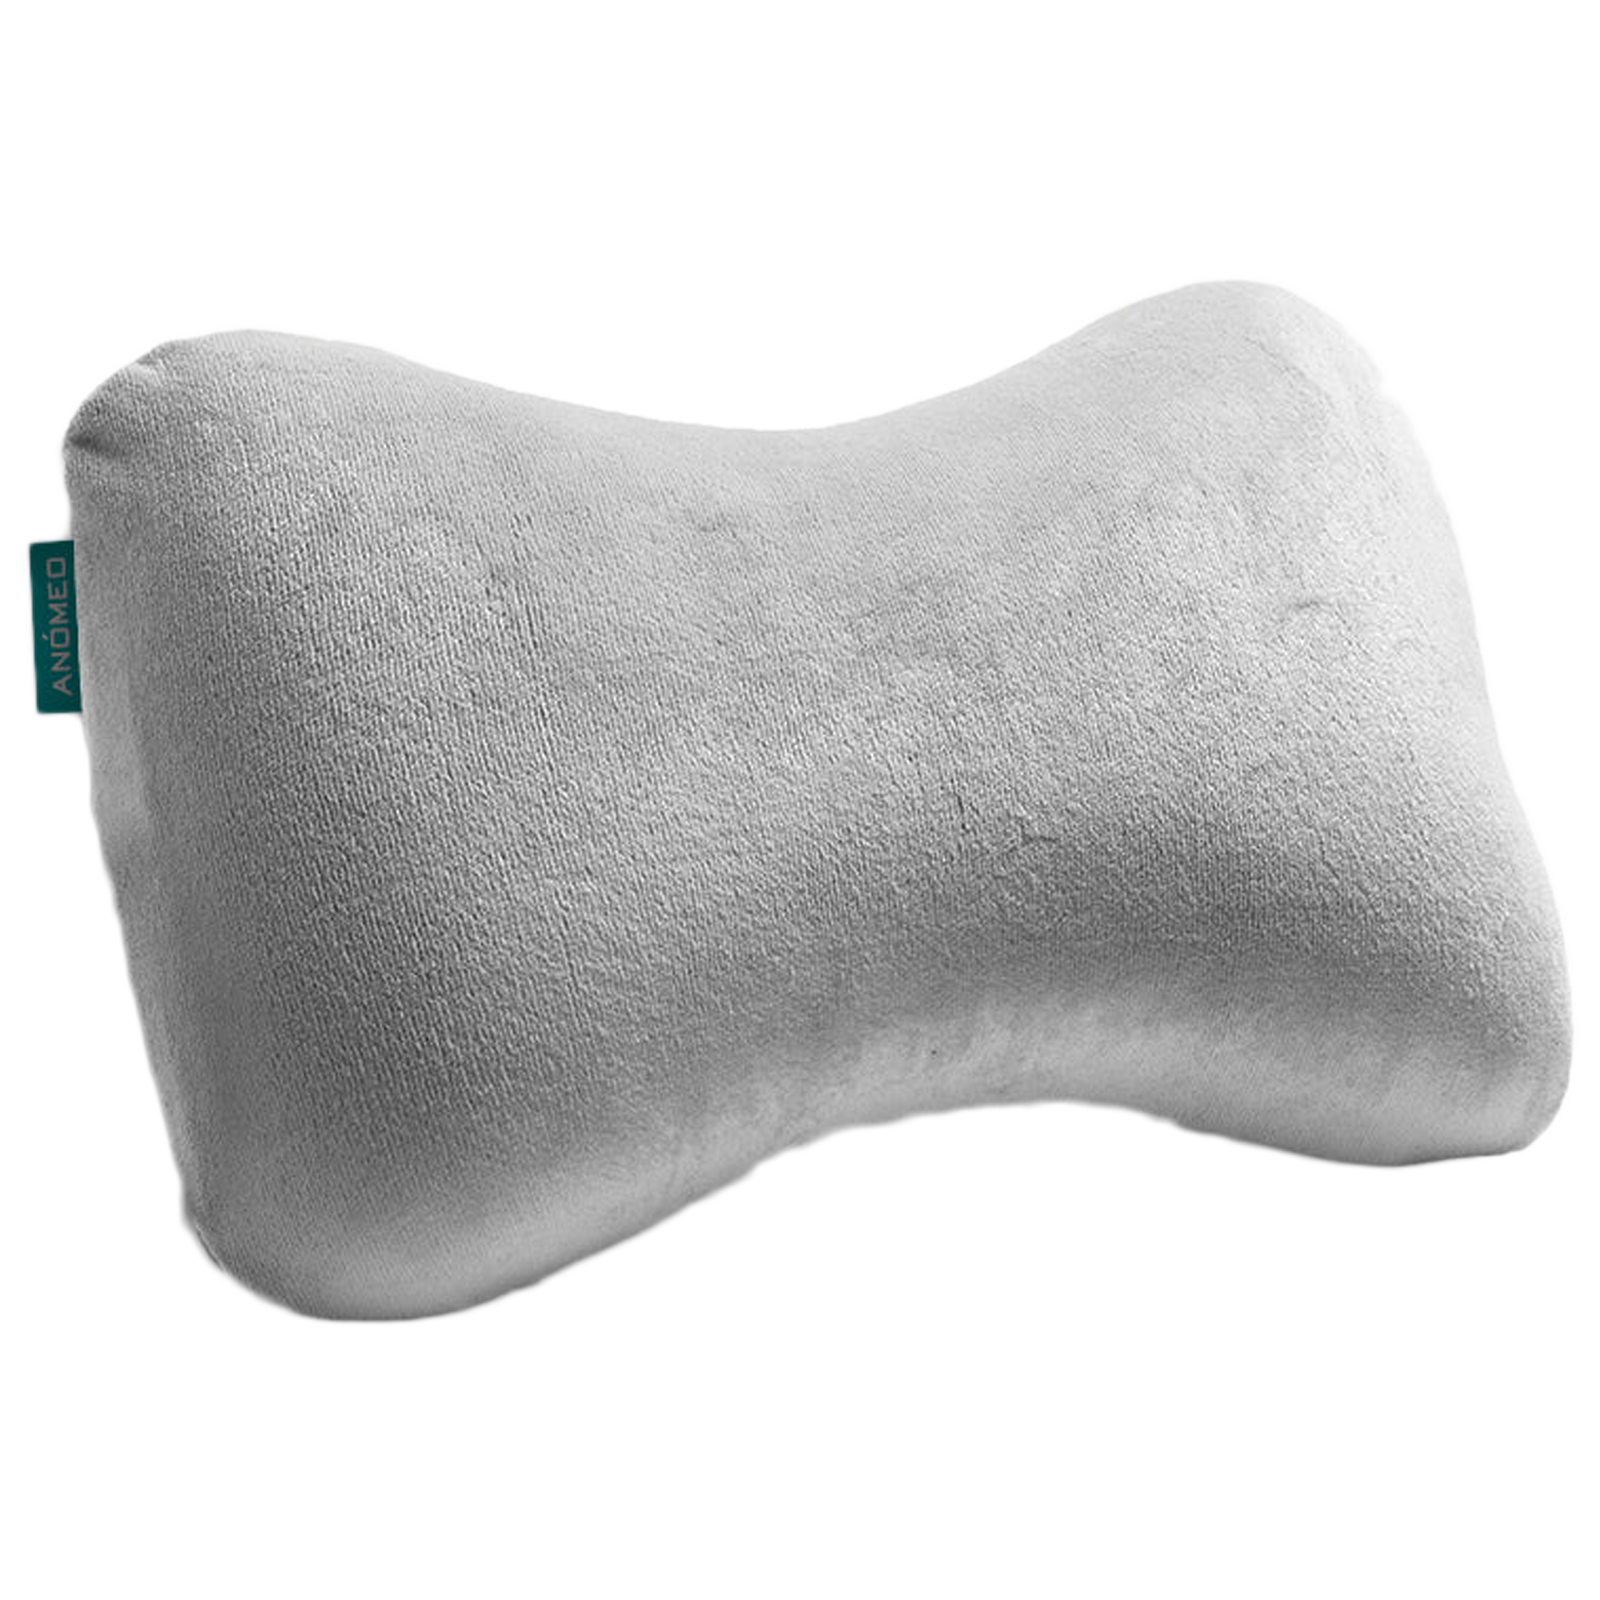 Anomeo Memory Foam Neck Pillow (Hypoallergenic and Portable, 2404, Grey)_1